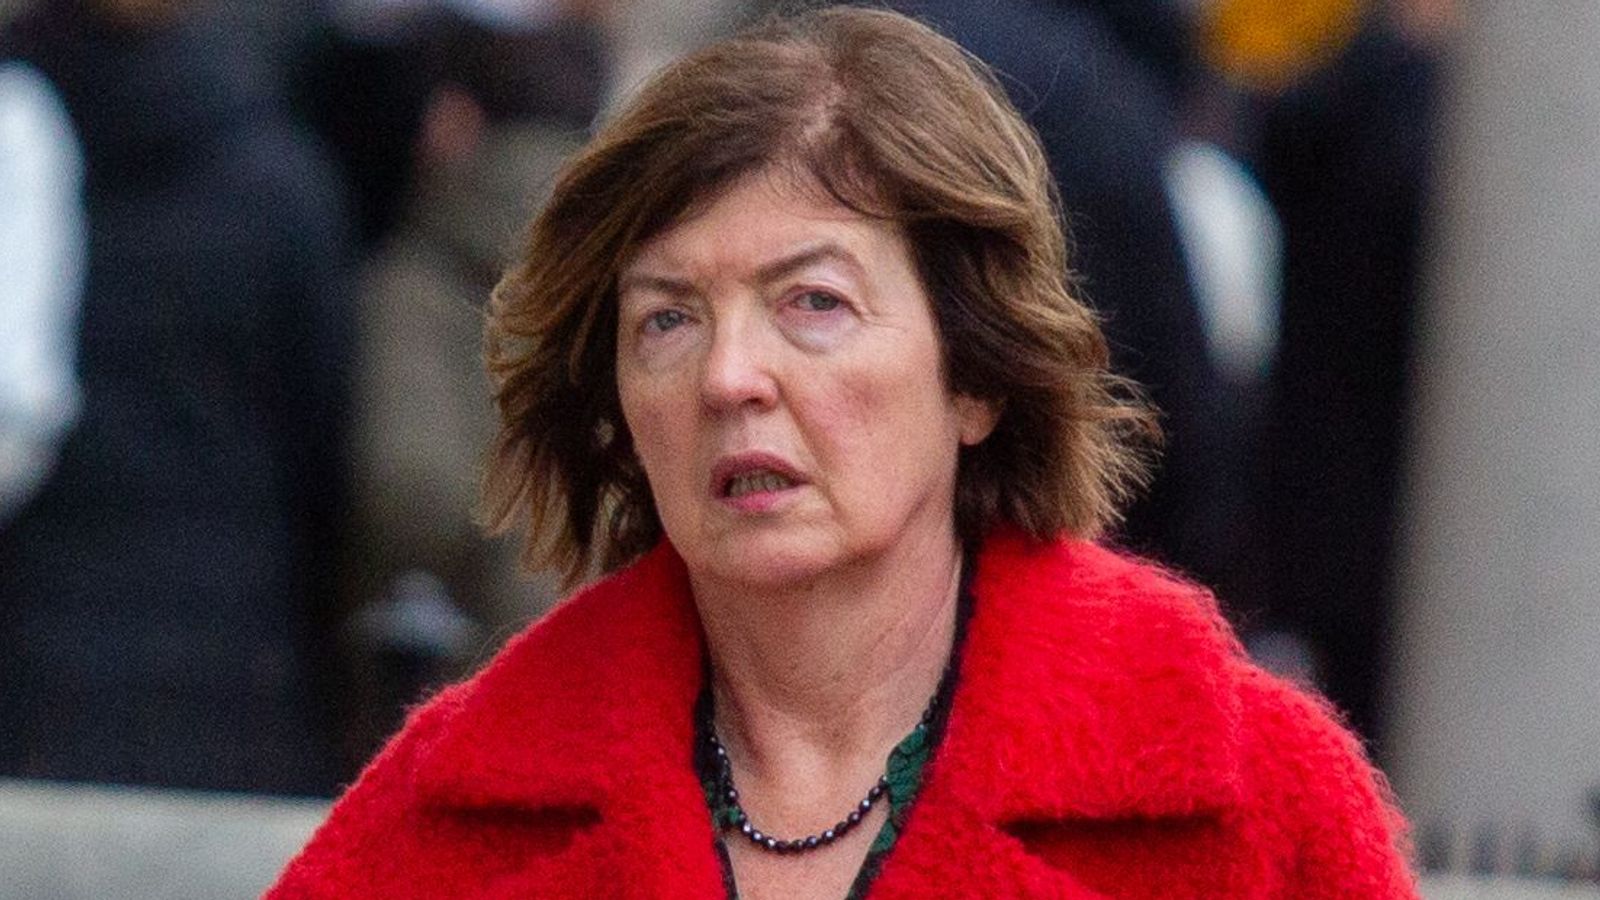 Sue Gray broke Civil Service code by discussing a job with Labour, Cabinet Office probe finds